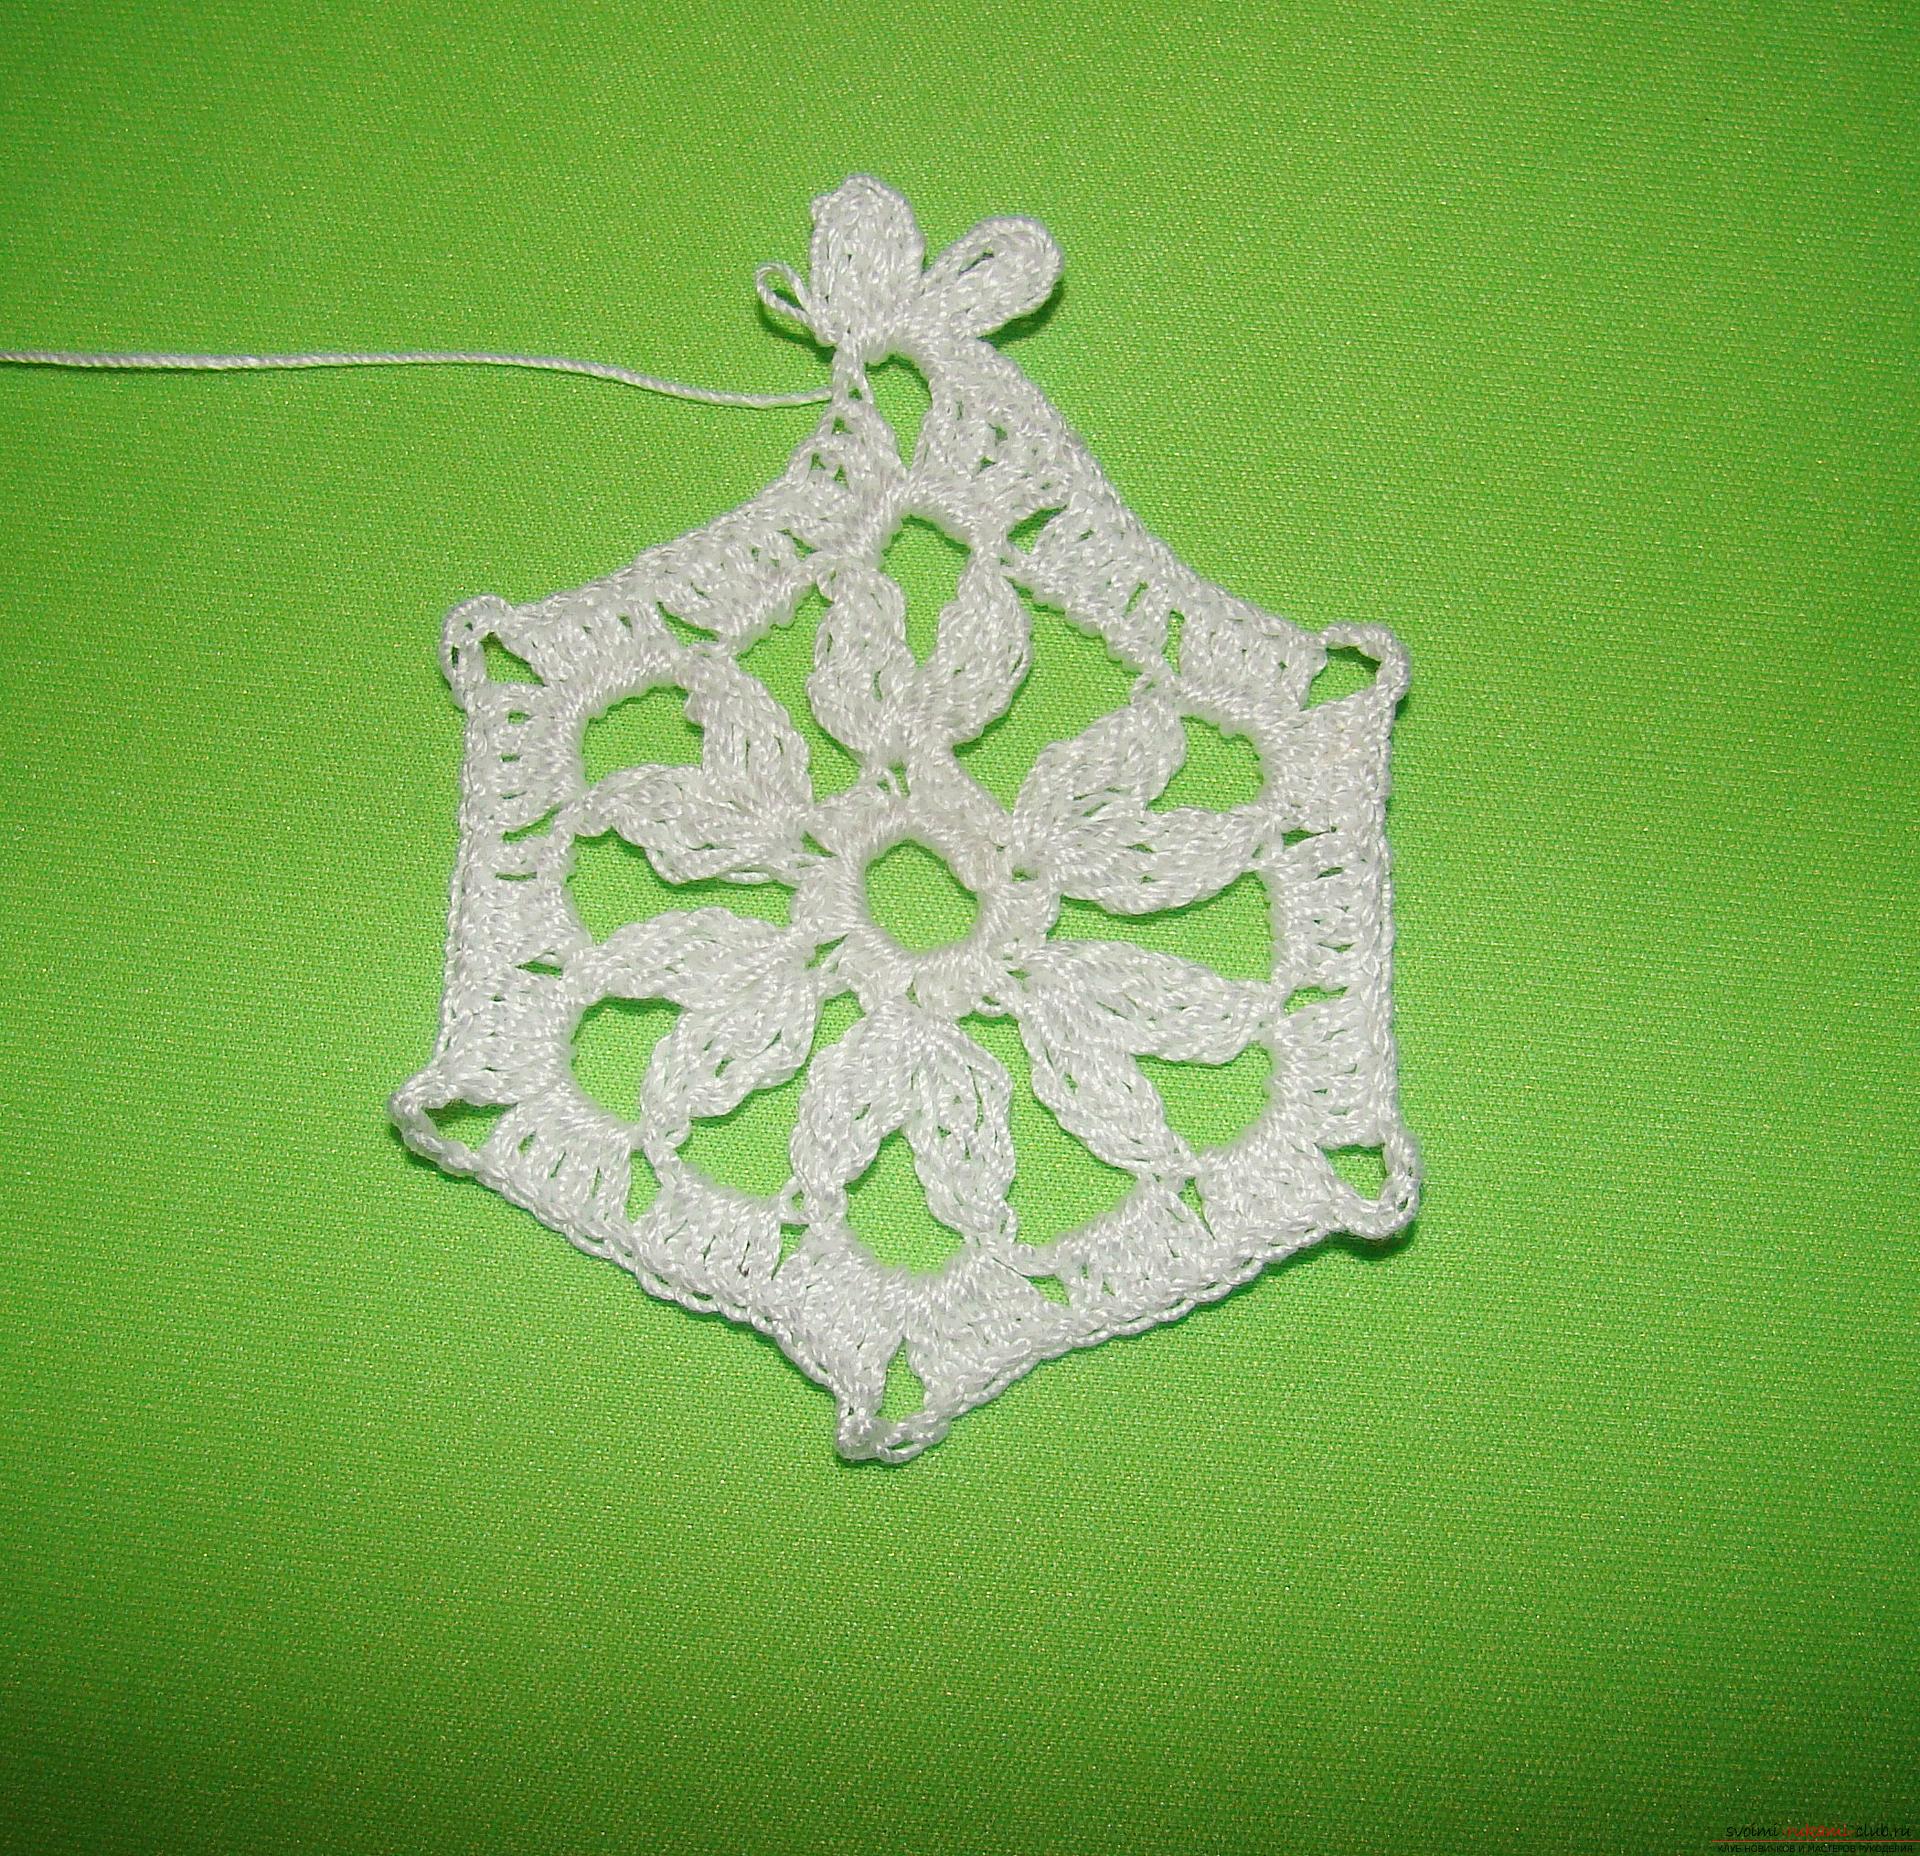 A master class with a photo and diagram will teach you how to tie snowflakes to a Christmas tree crochet. Photo number 12